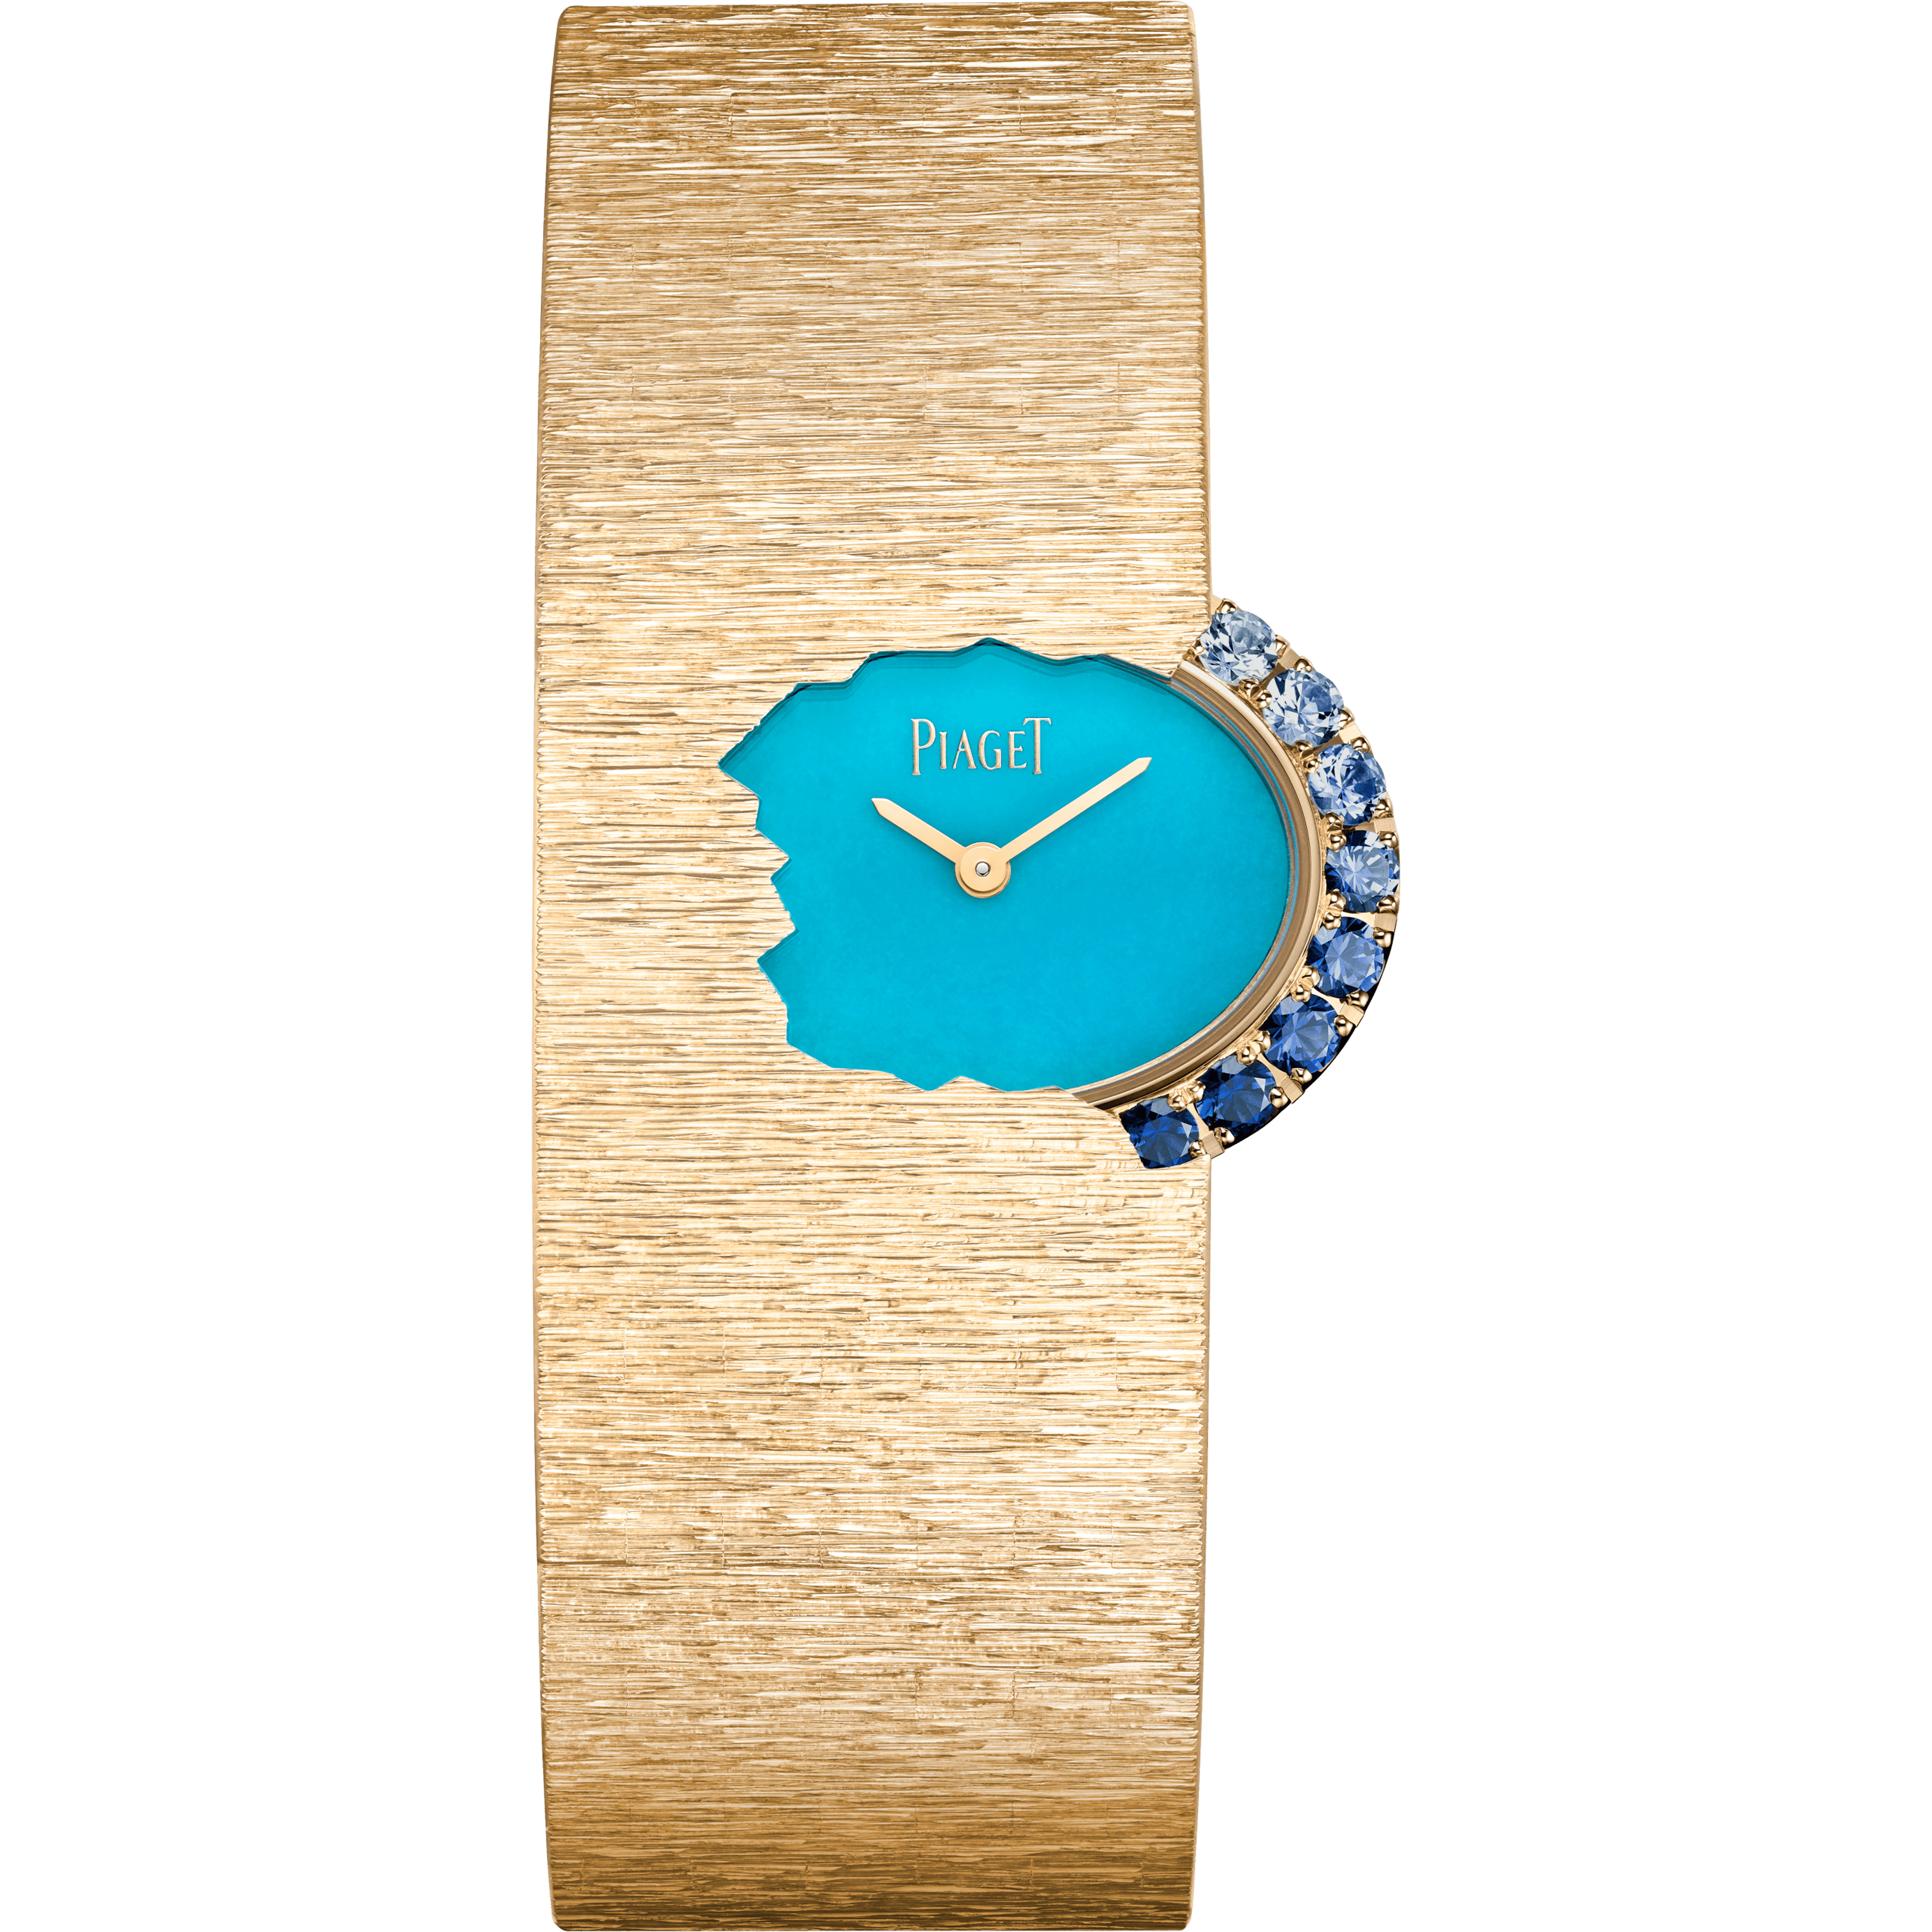 Piaget Limelight High Jewelry Watch